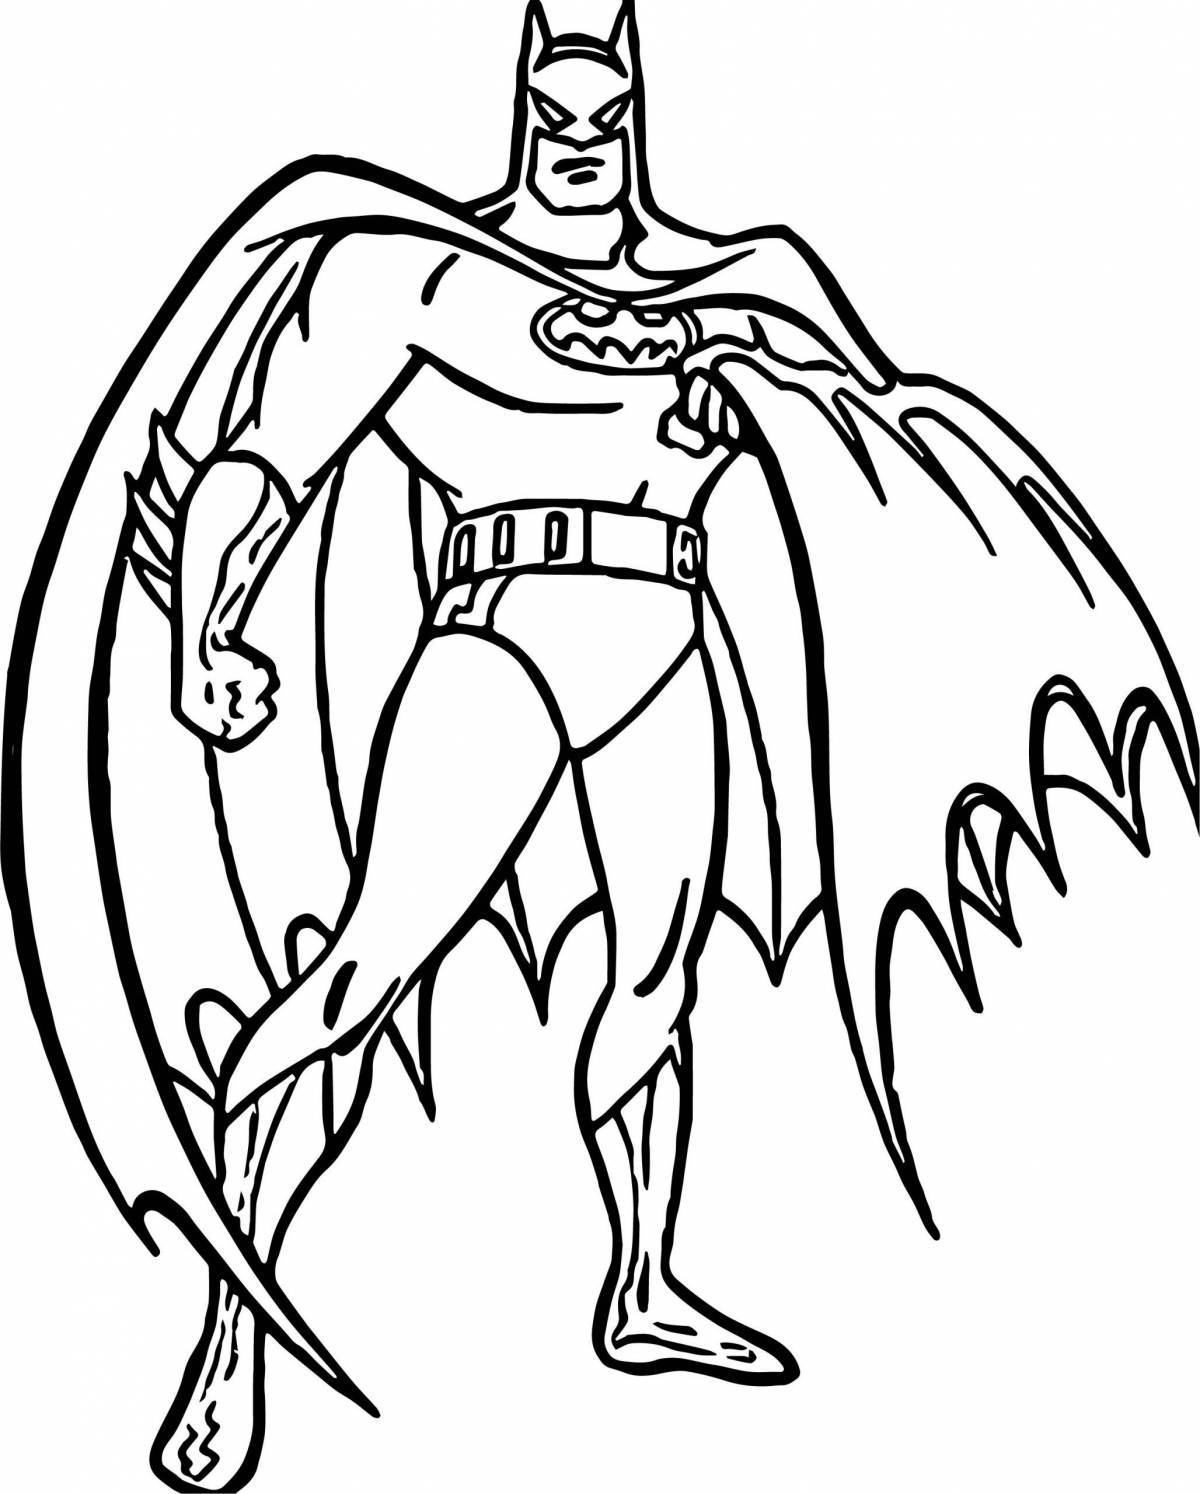 Glorious superheroes coloring pages for kids